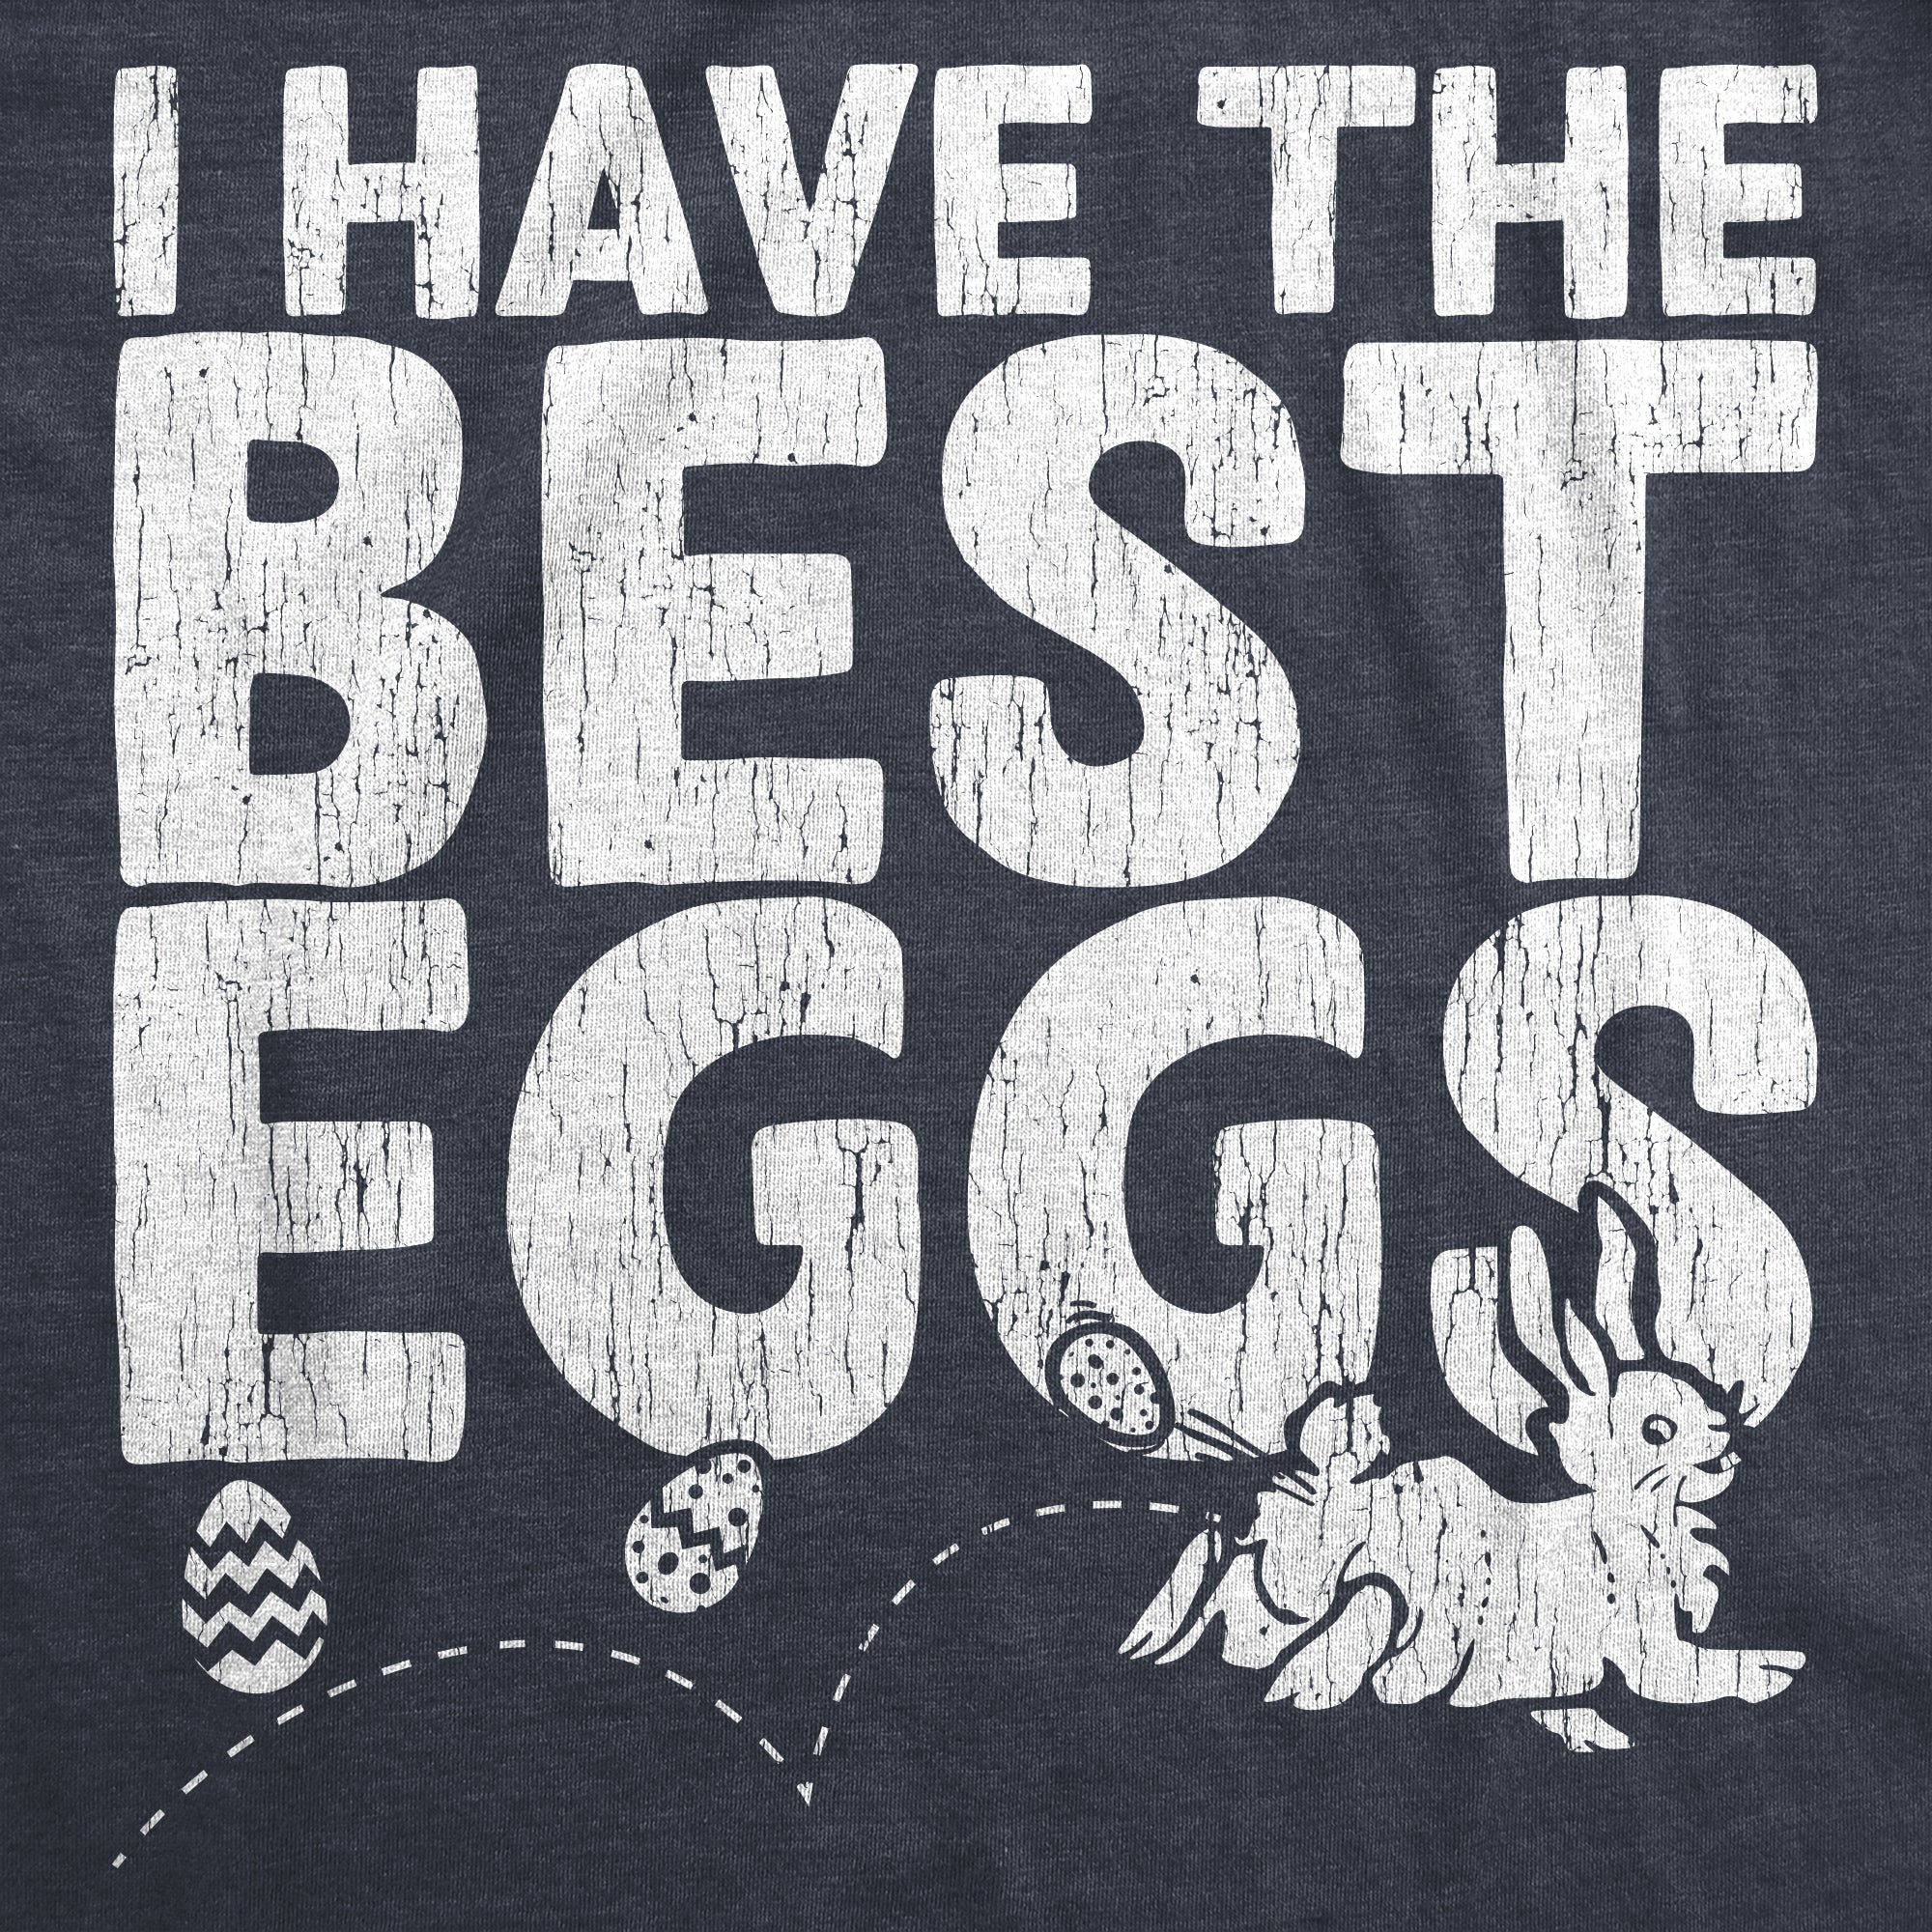 Funny Heather Navy - Best Eggs I Have The Best Eggs Womens T Shirt Nerdy Easter Tee